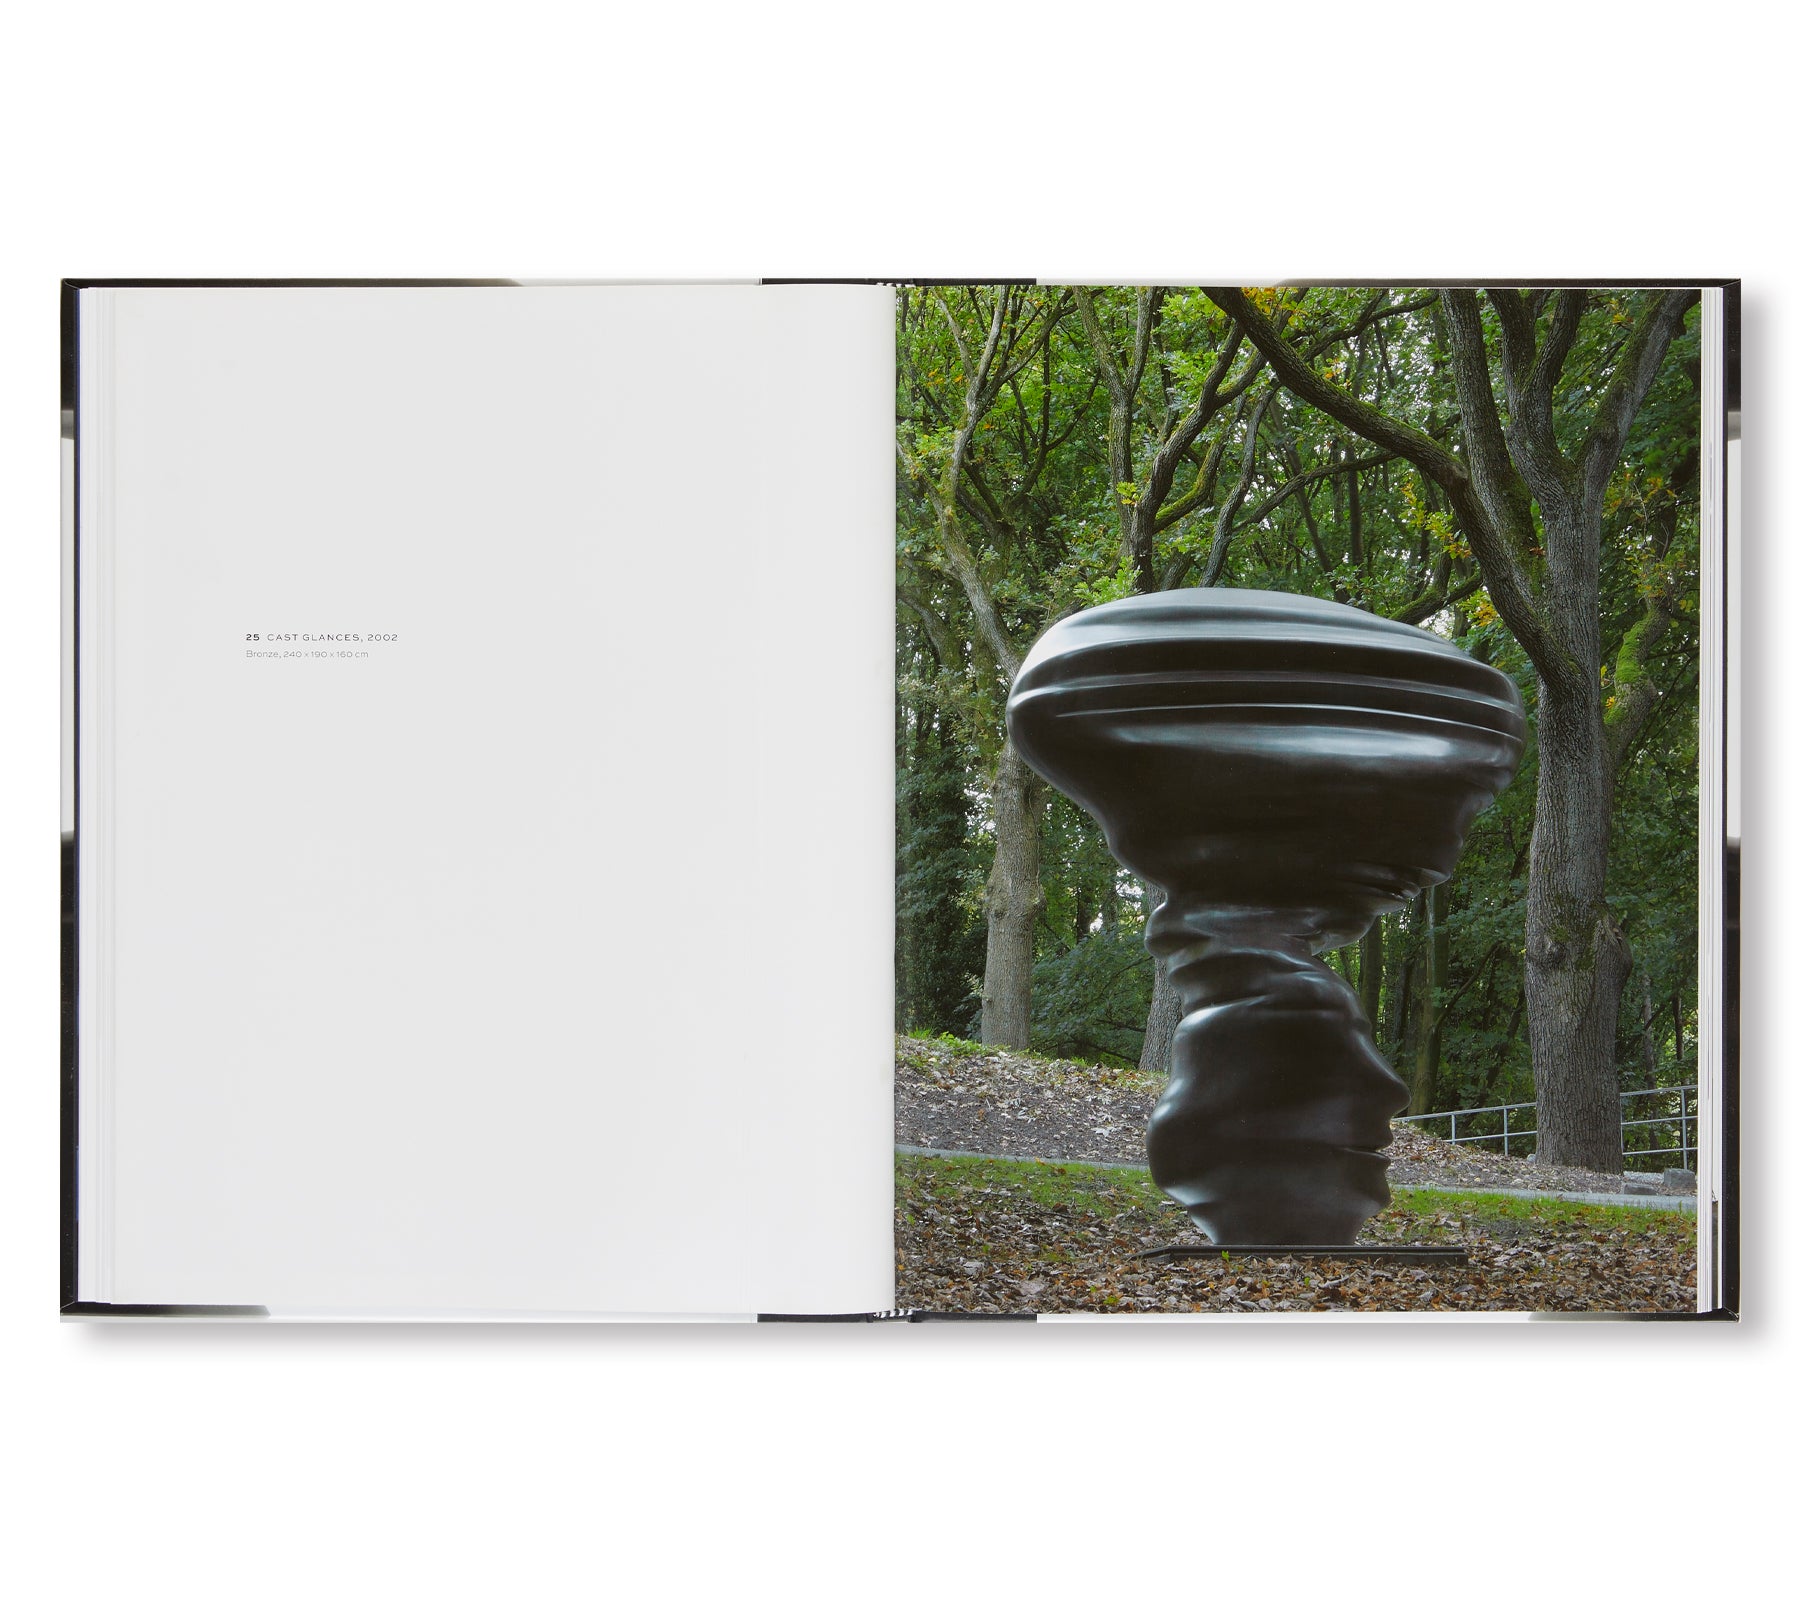 SCULPTURES AND DRAWINGS by Tony Cragg